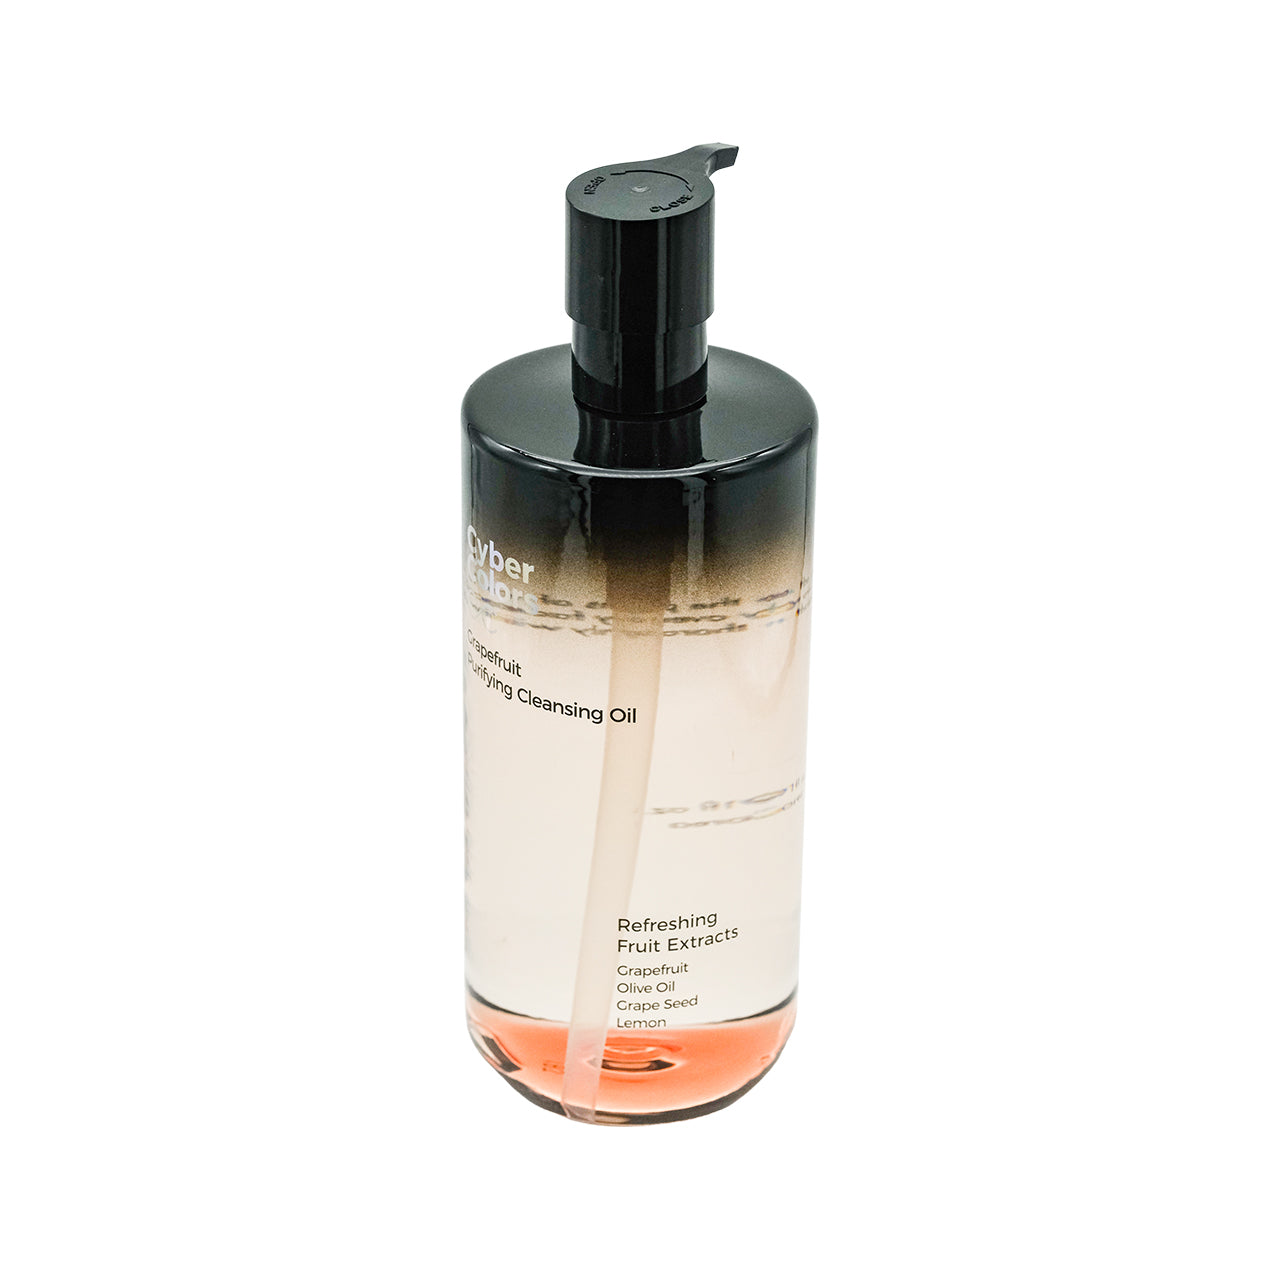 Cyber Colors Purifying Cleansing Oil Grapefruit 500ml | Sasa Global eShop